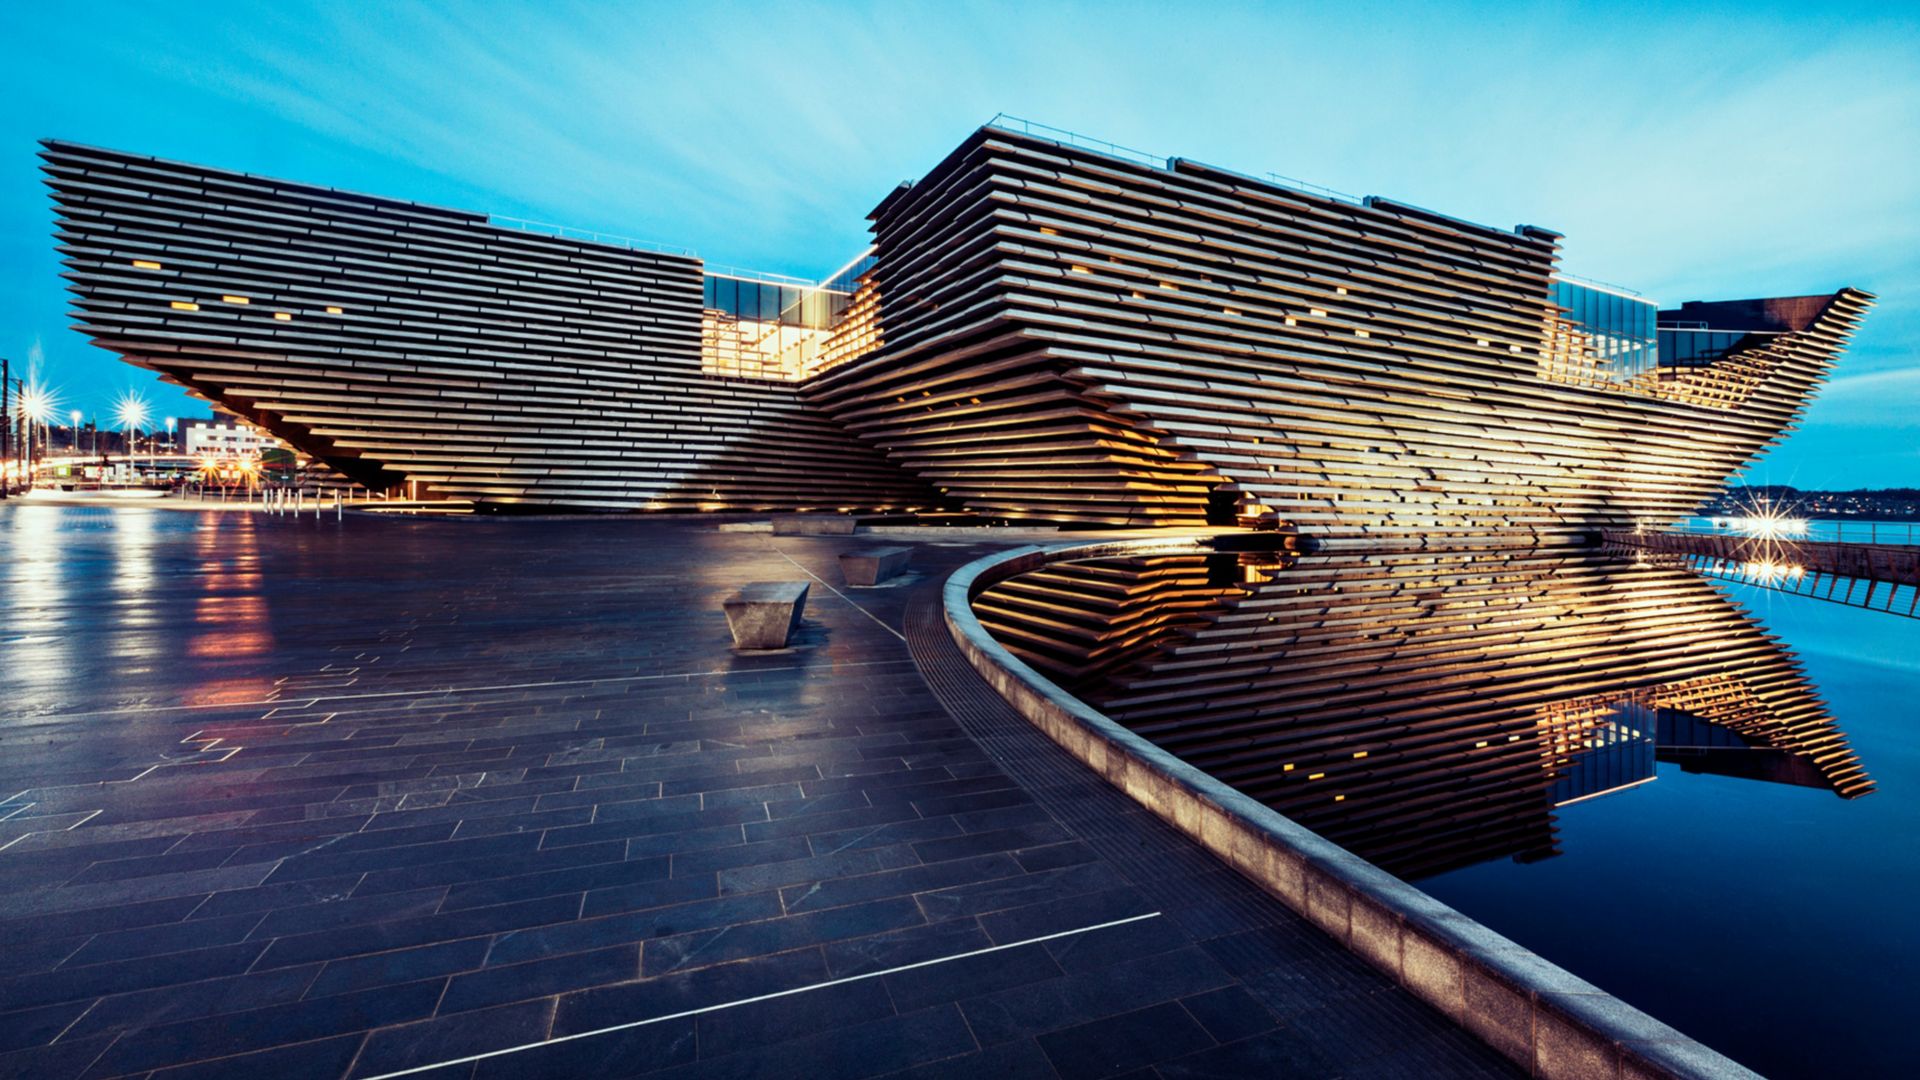 V&A Dundee Design Museum in Dundee, Scotland